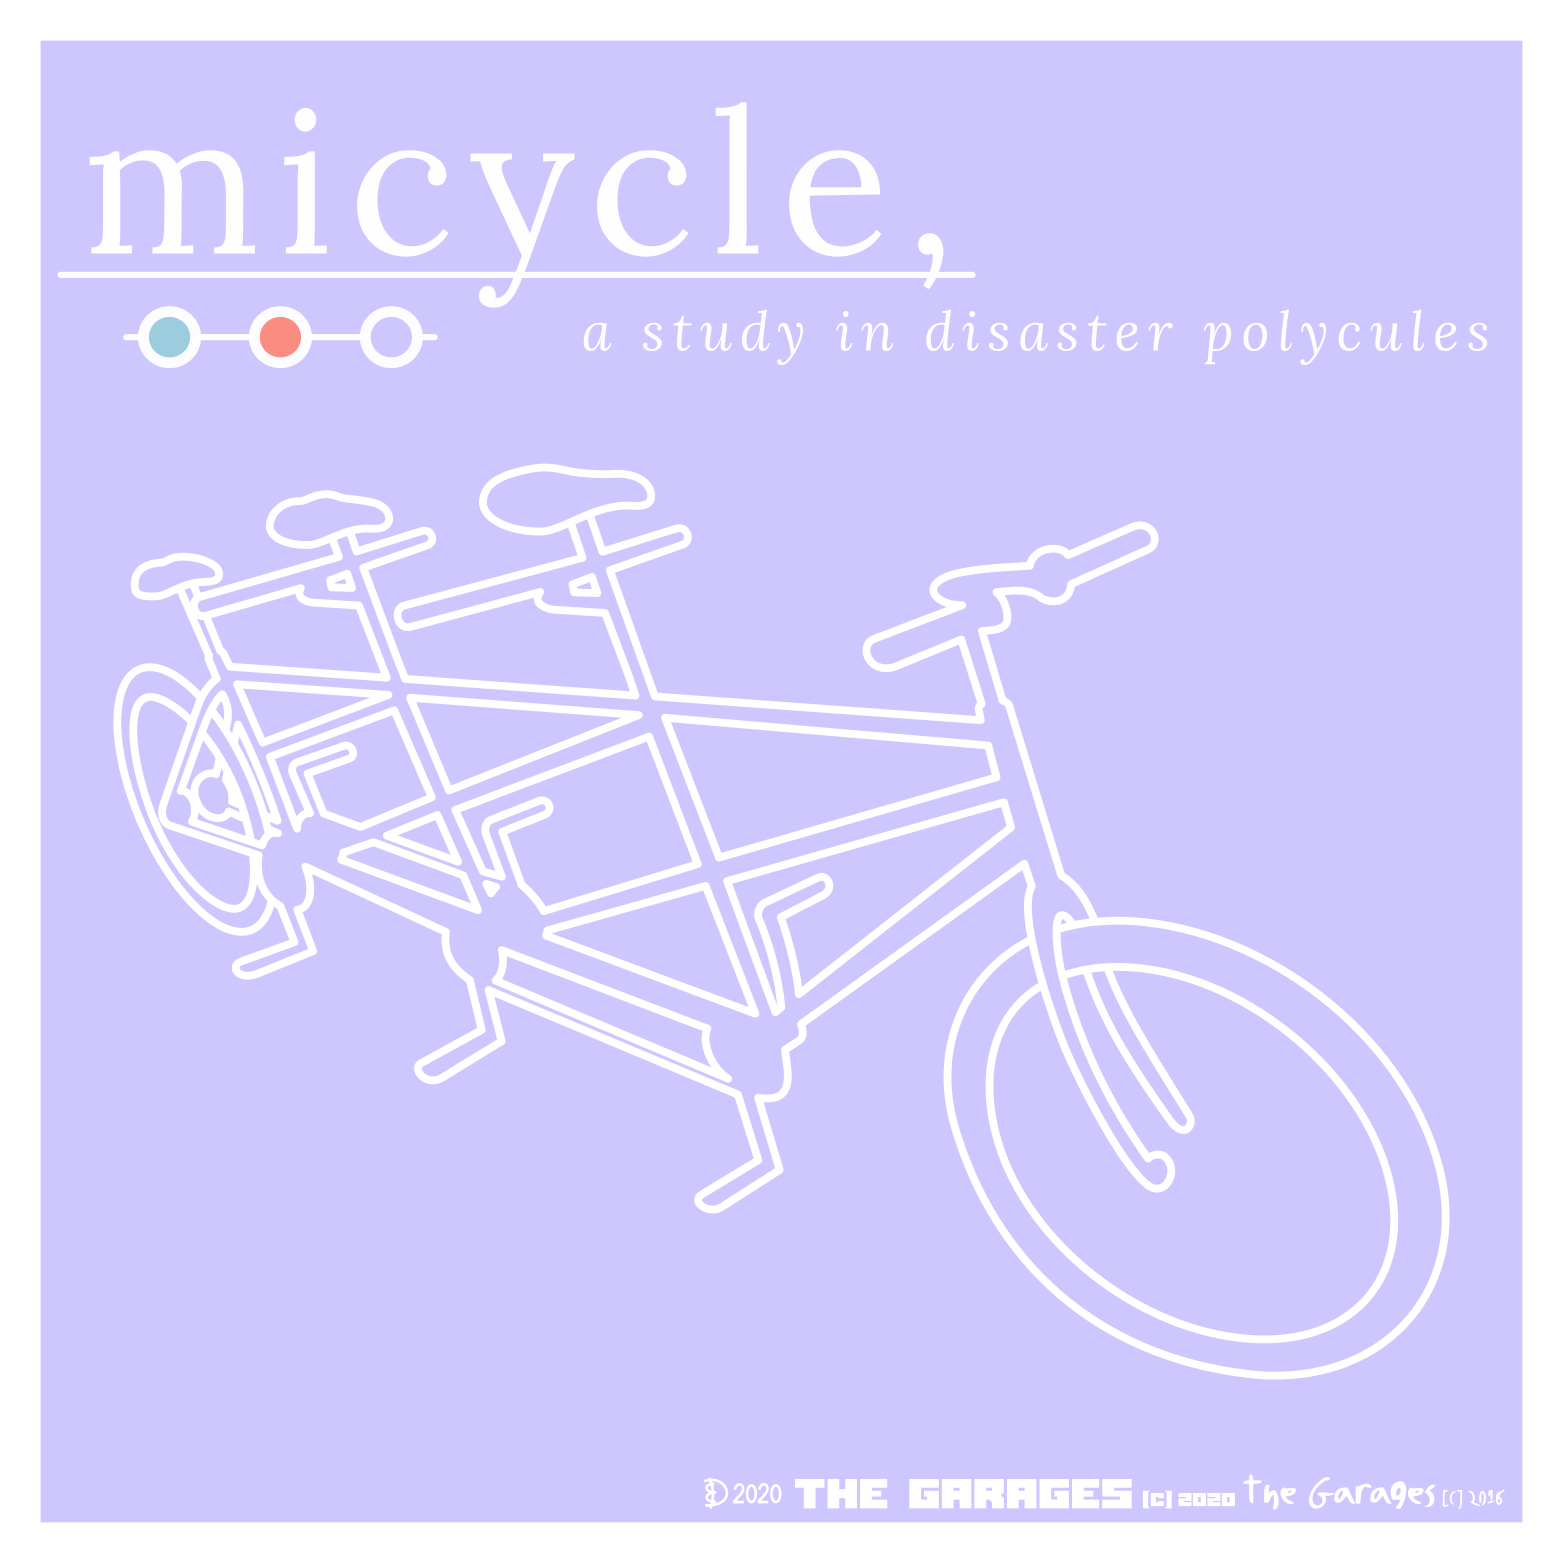 A line drawing of a tandem bicycle headed to the viewer's right, with title graphics above it.